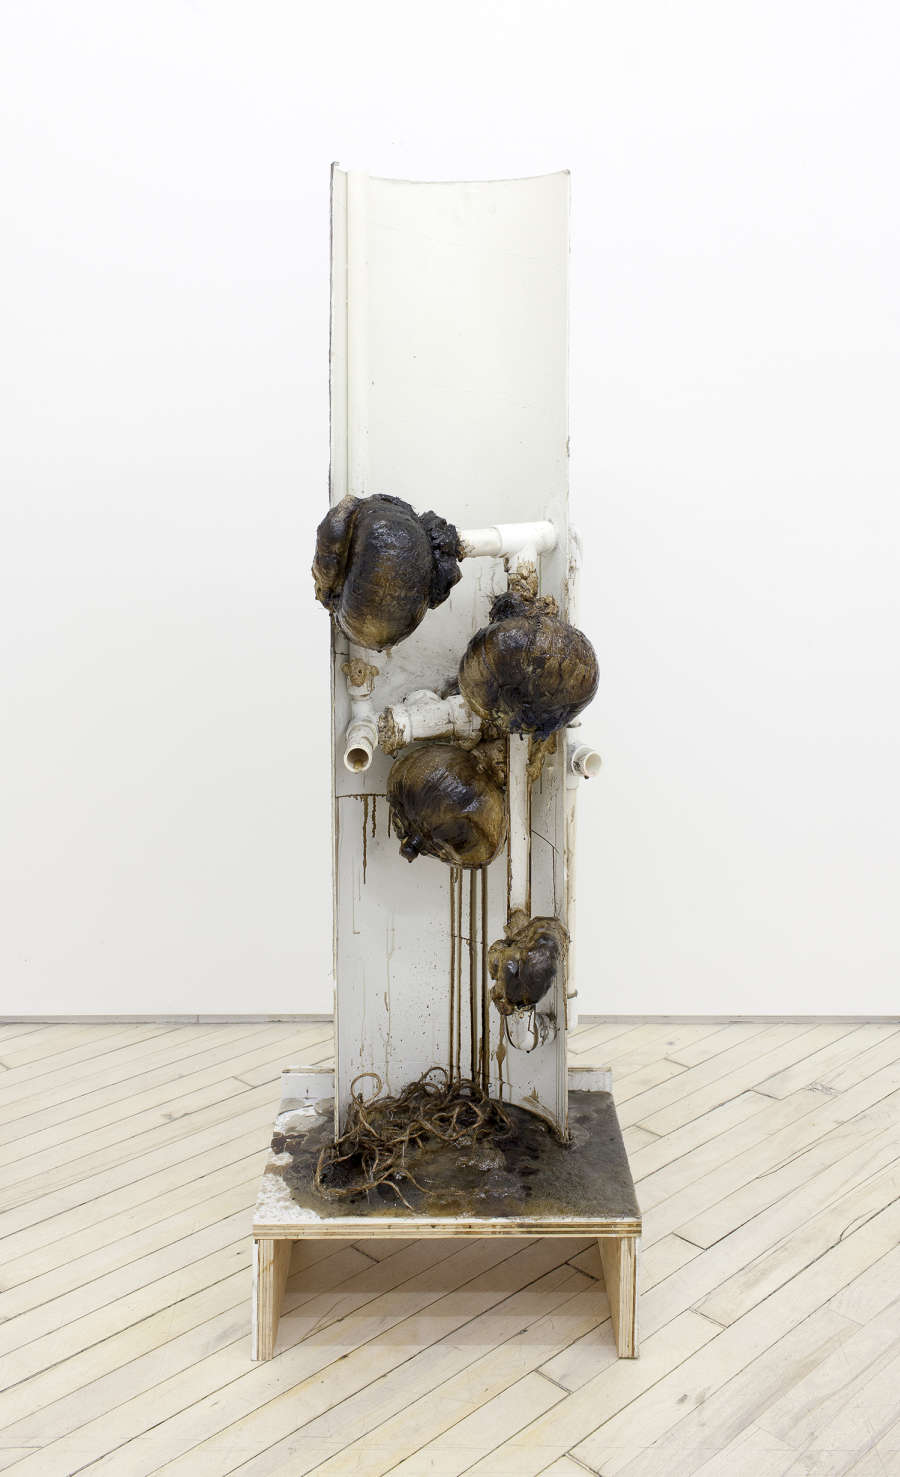 Image of a sculpture by Brandon Ndife showing a white painted tube rising from a wooden platform. There is a network of PVC pipes inside of this tueb with various gourds and other vegetal material growing and spilling over.